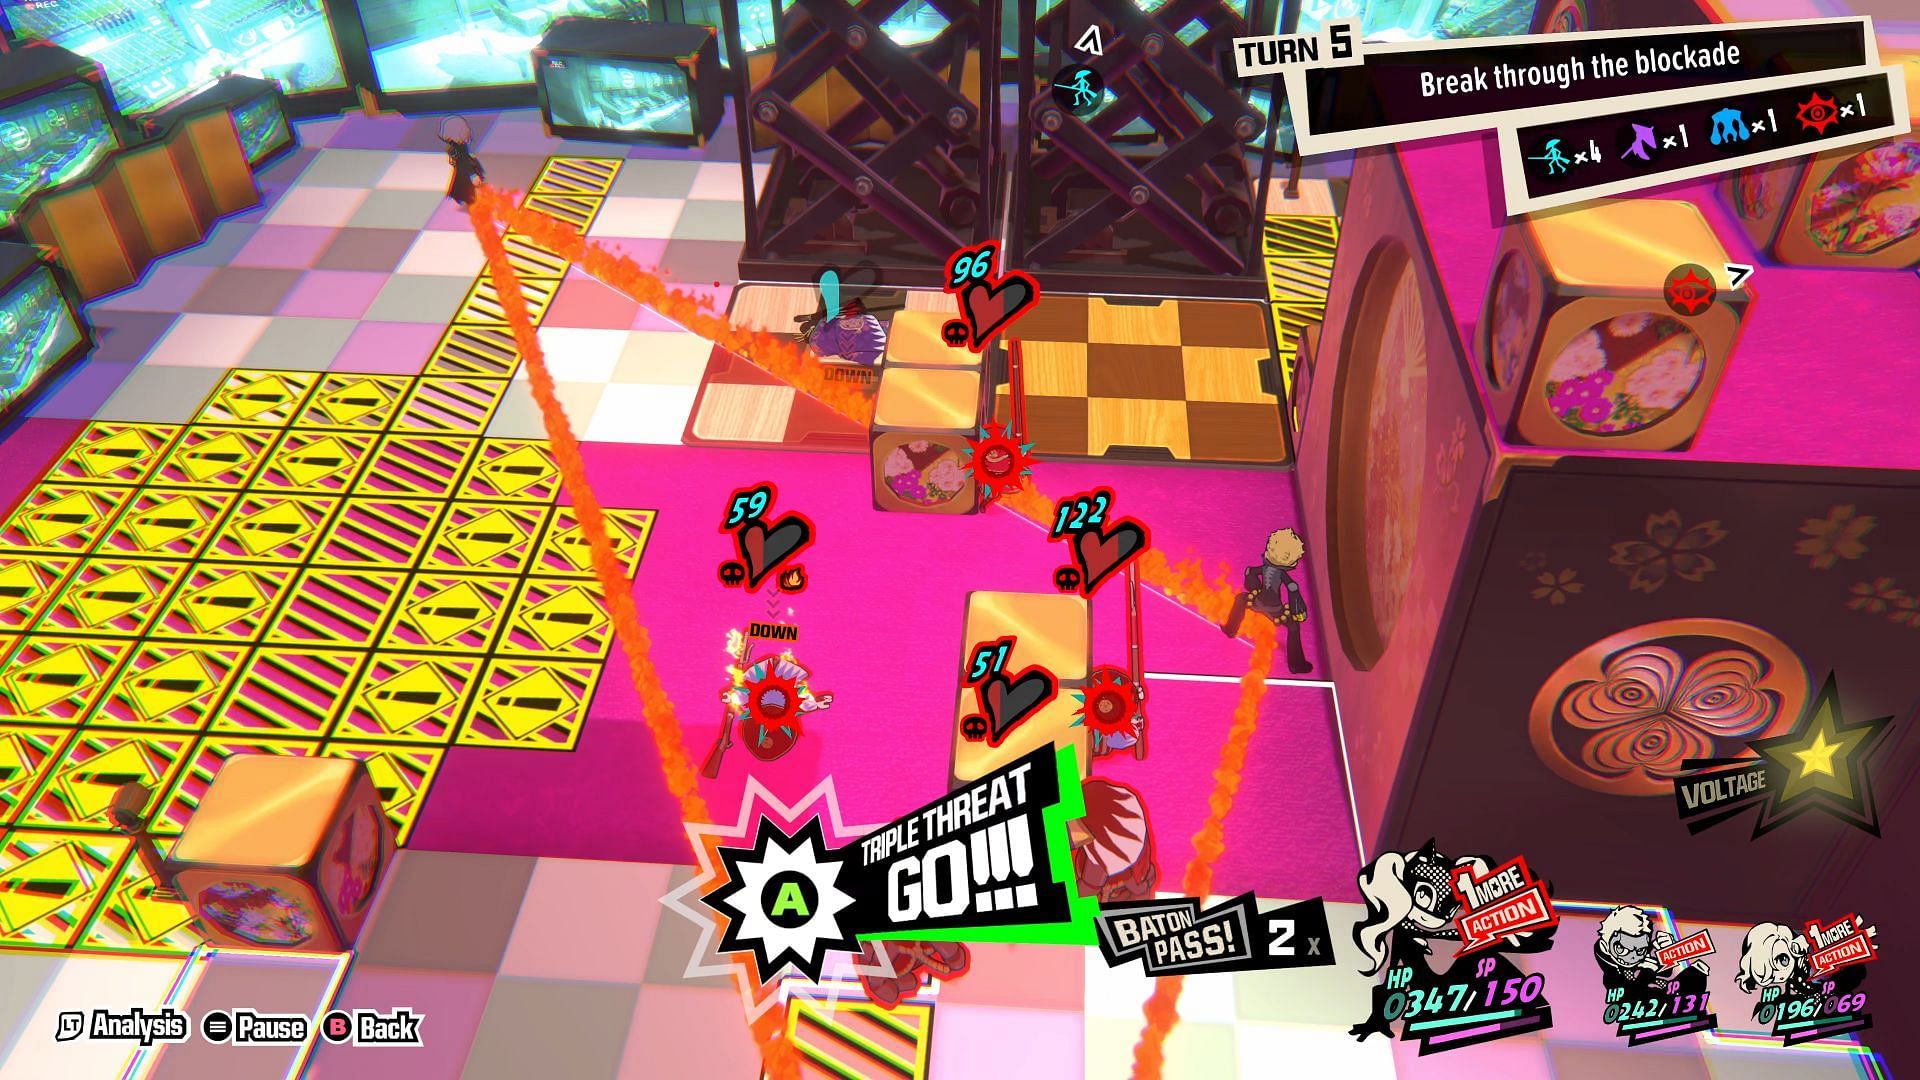 Triple-threat will take out multiple enemies in one go (Image via Persona 5 Tactica)